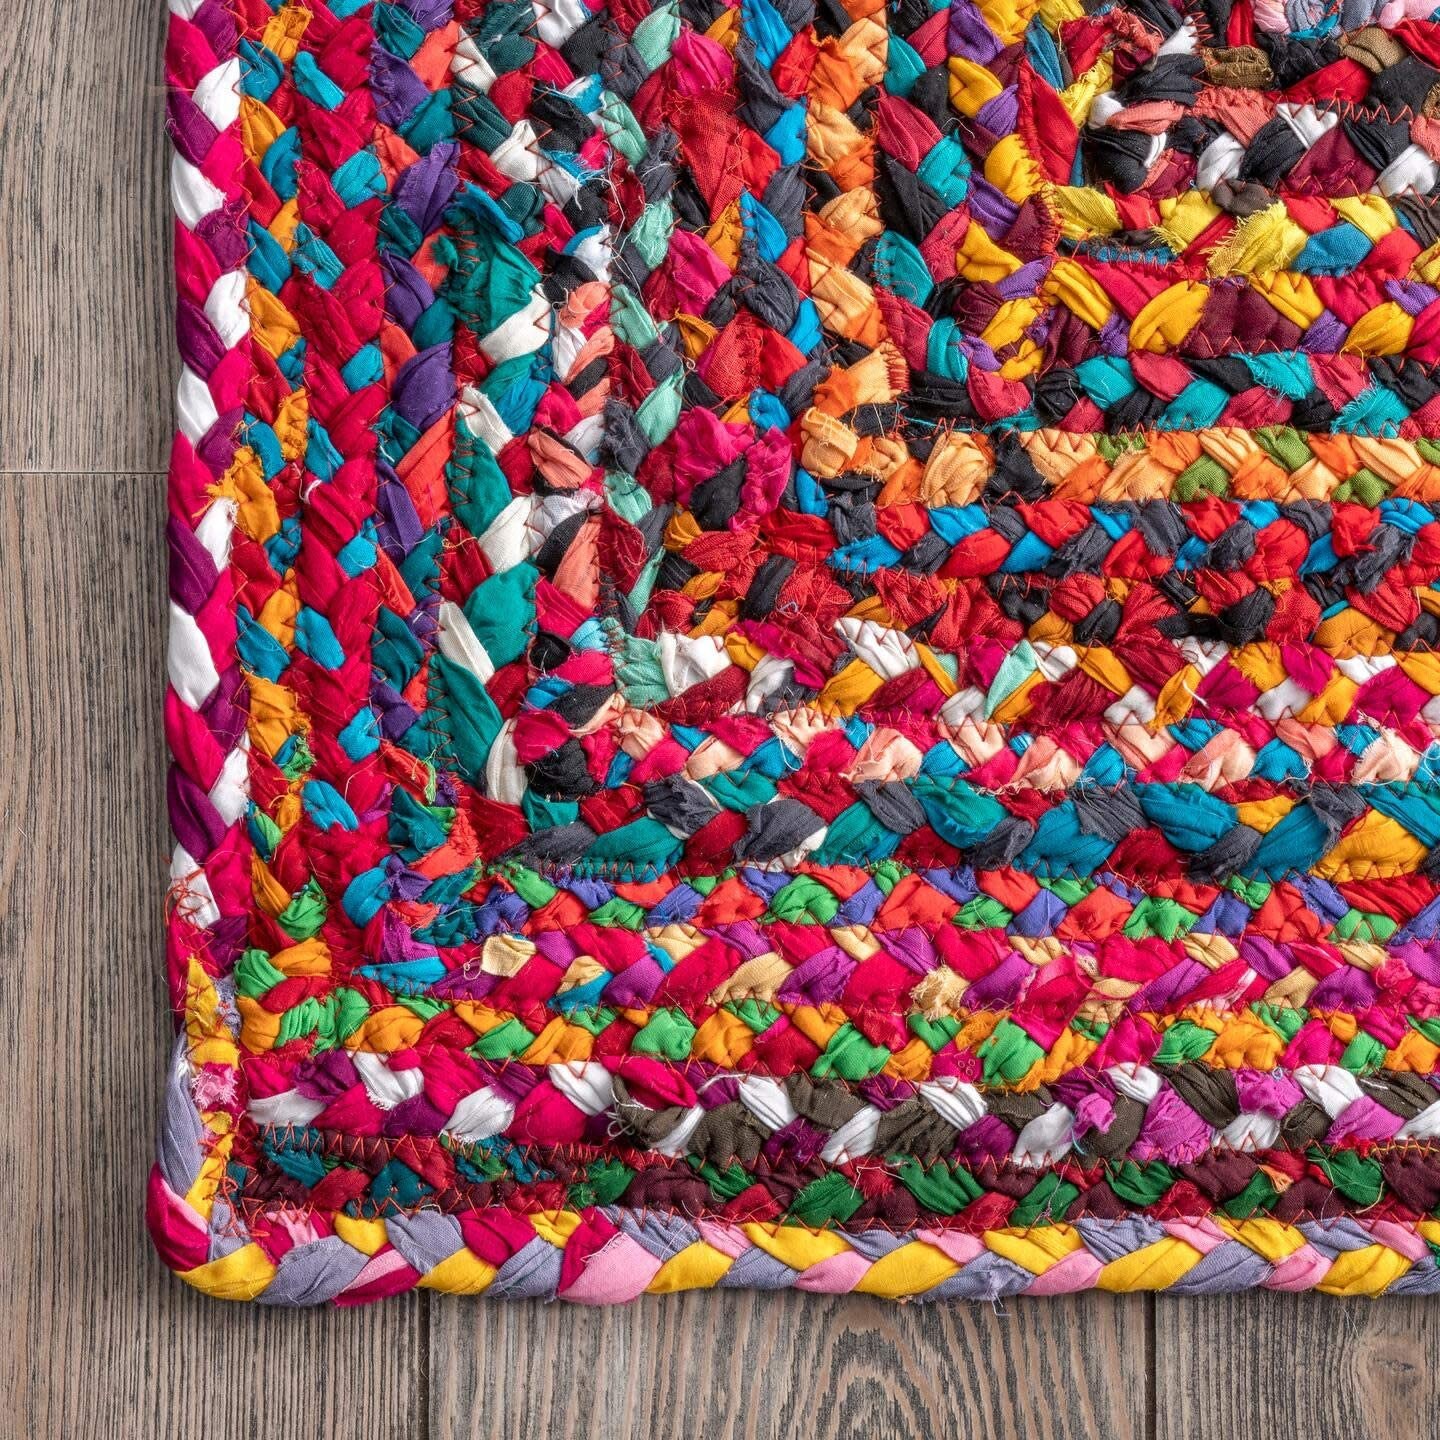 Vibrant 5'x7′ Colorful Braided Rag Rug - Beautiful handmade colorful rugs  Recycled cotton cloth Rectangle shape handmade rag rugs from Jaipur. That  has been made by stitching old clothes small pieces together